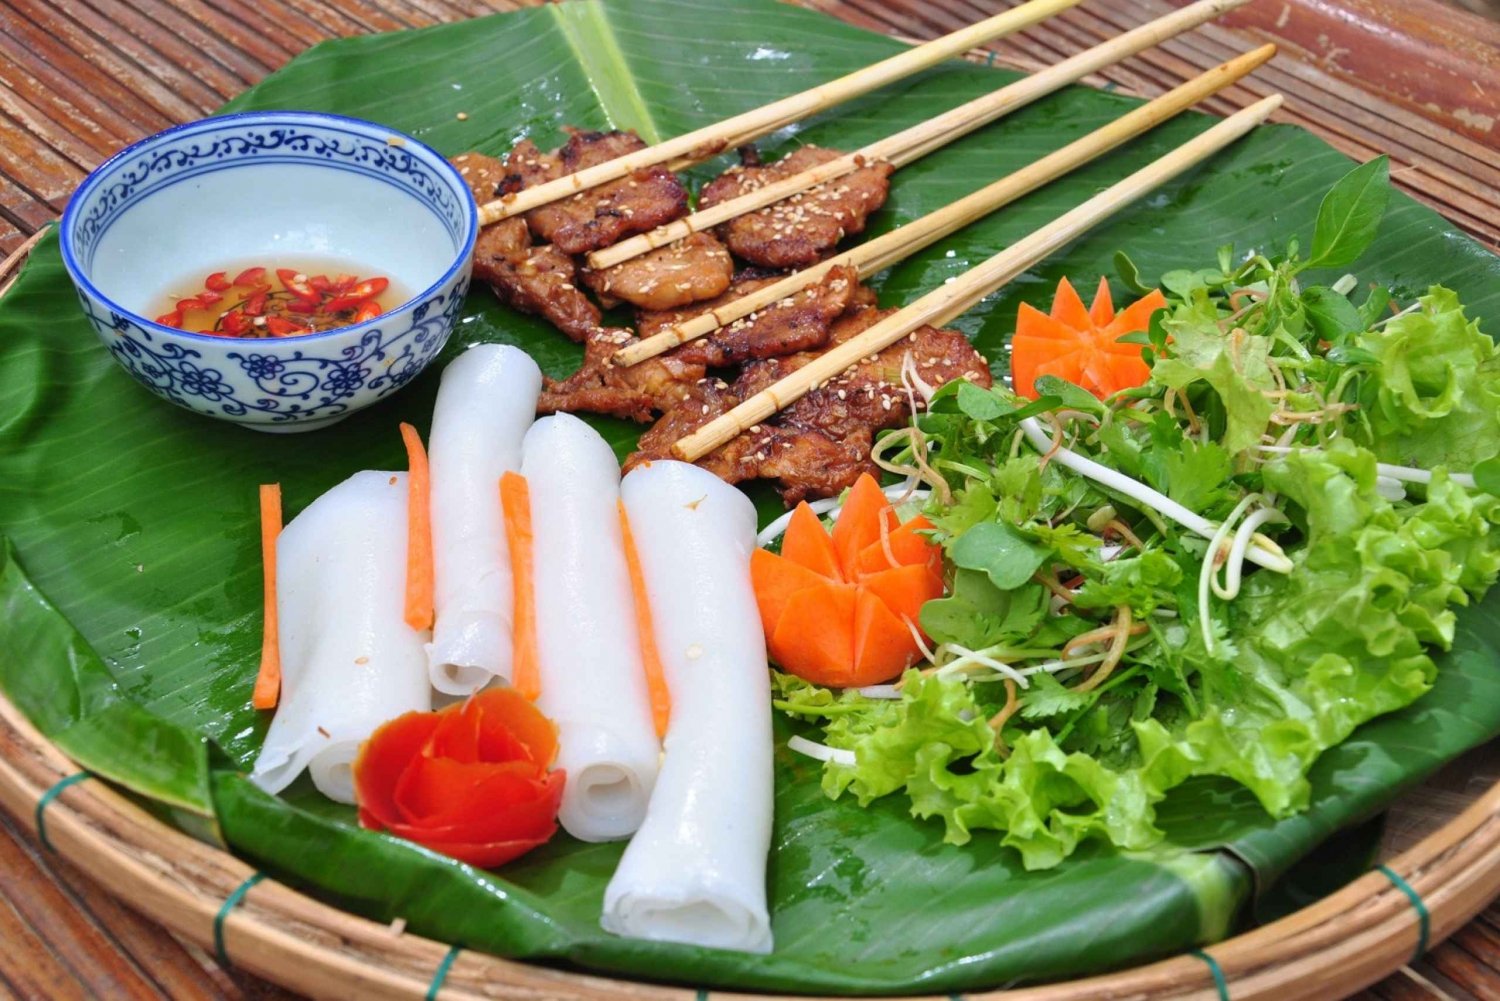 From Hoi An: Vietnamese Cooking Class with a Family